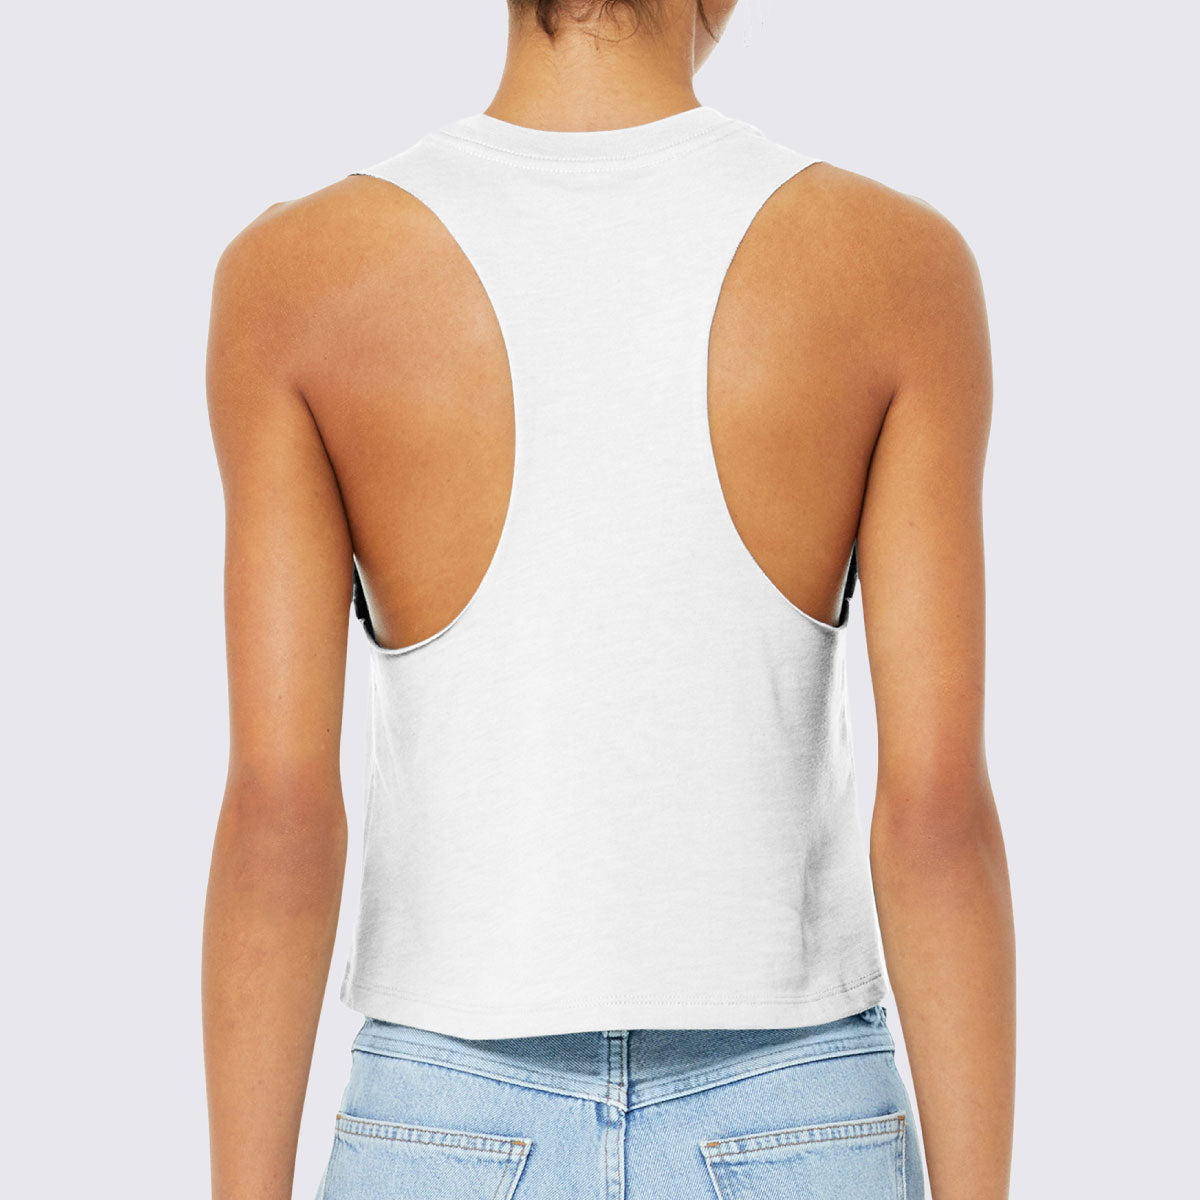 I Can. I Will. End of Story. Cropped Racerback Tank